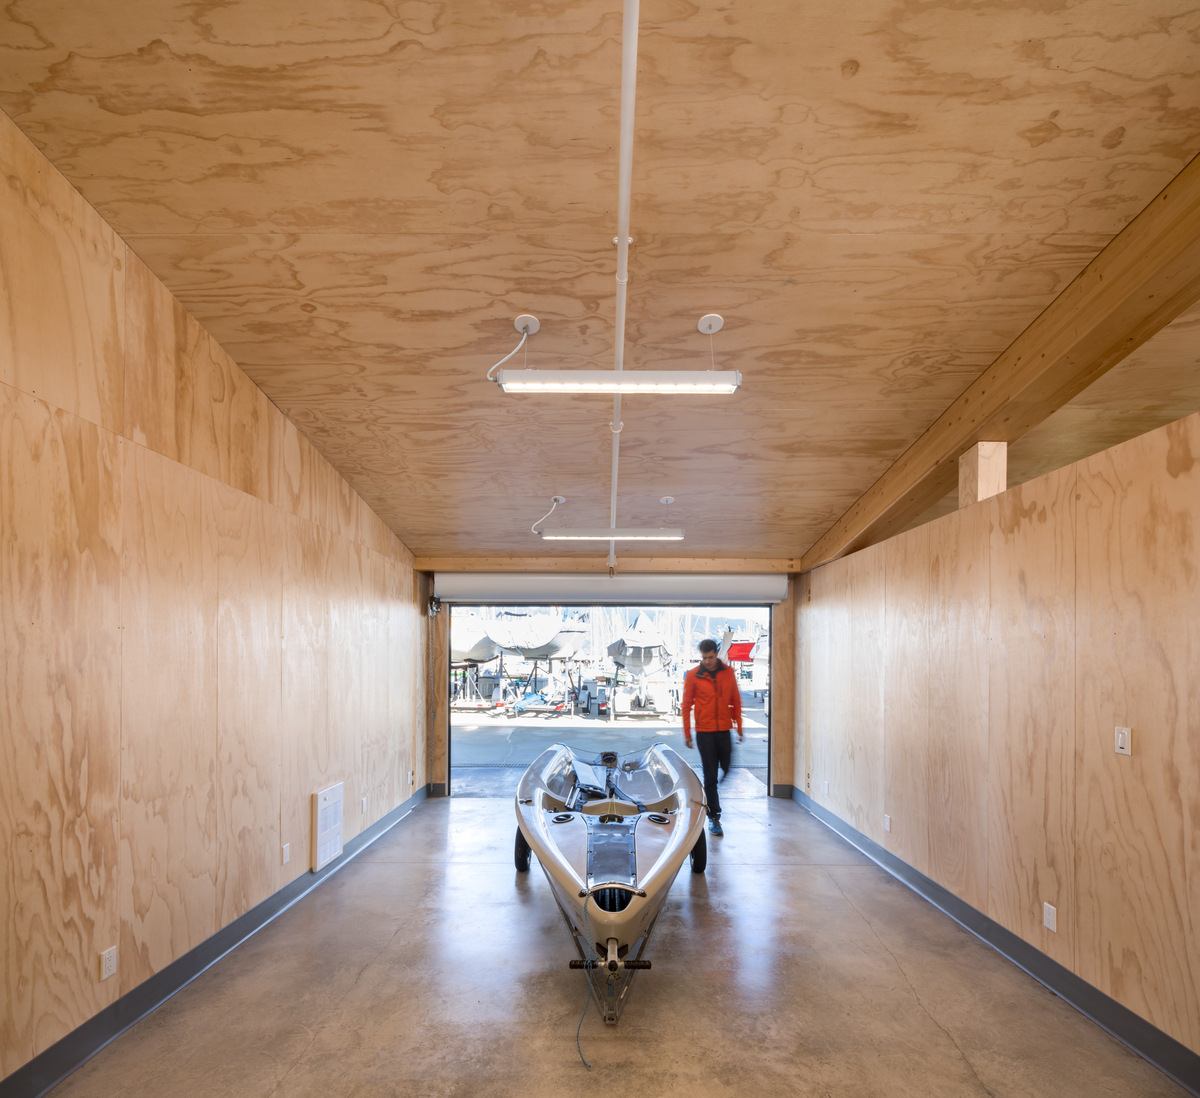 Interior daytime view of man and boat inside Dock Building at the Royal Vancouver Yacht Club, showing sunny interior storage area constructed from spruce-pine-fir glulam posts and beams with 2 x 6 Douglas-fir tongue and groove plywood infill decking